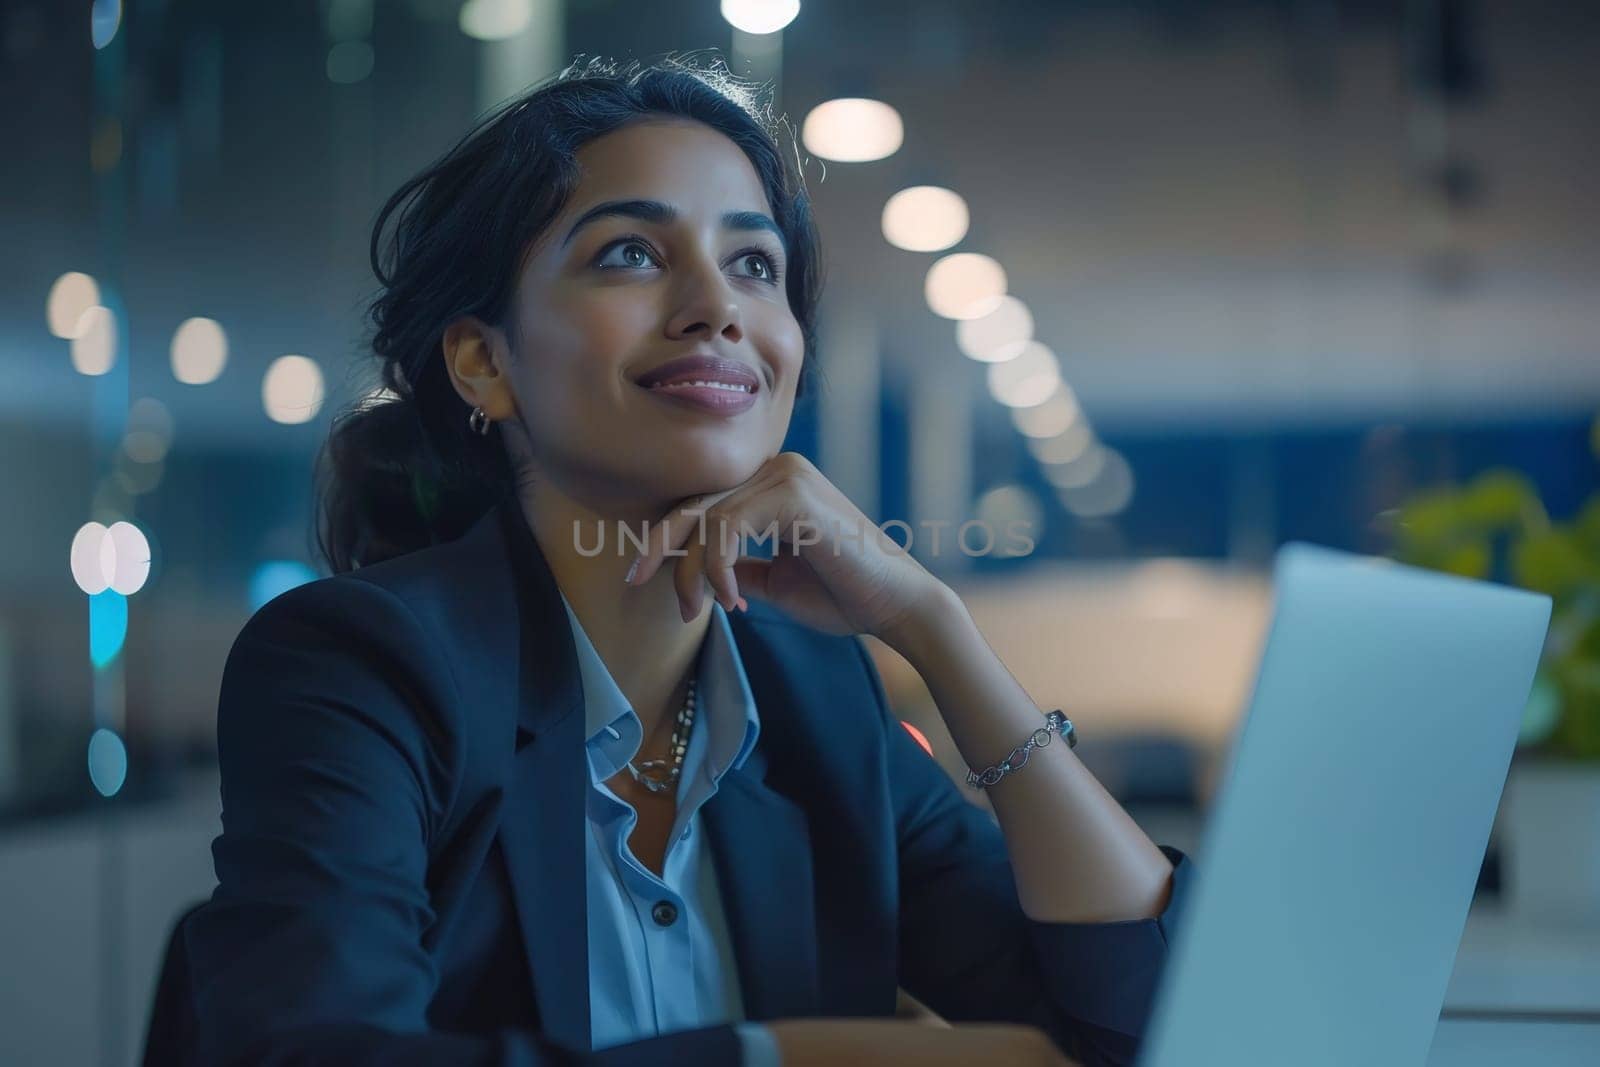 A woman in a business suit is sitting at a desk with a laptop in front of her. She is smiling and looking at the screen, possibly working or browsing the internet. Concept of productivity and focus